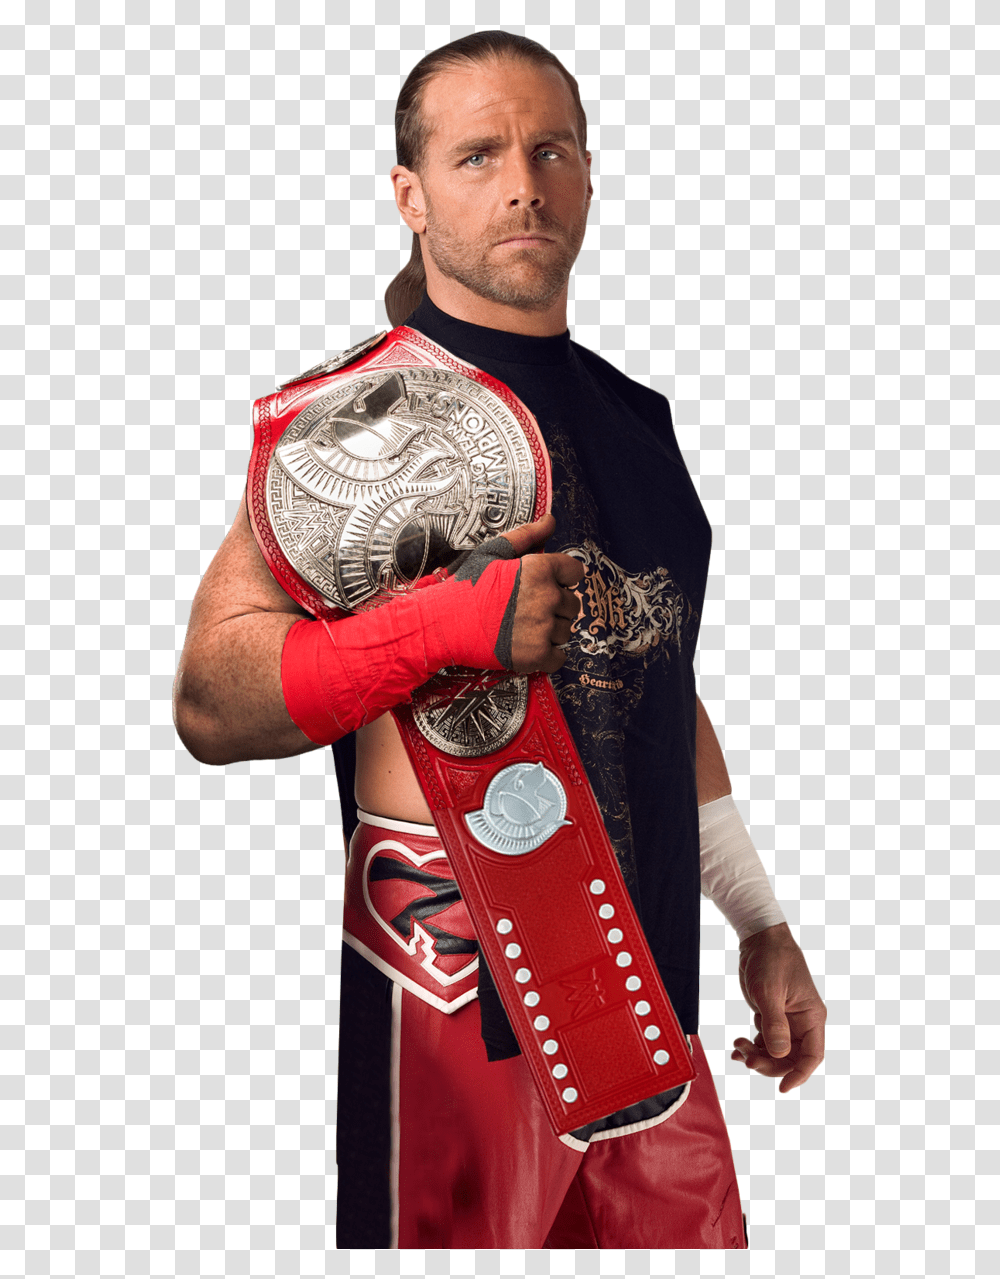 Shawn Michaels Shawn Michaels Wwe Champion, Person, Human, Costume Transparent Png